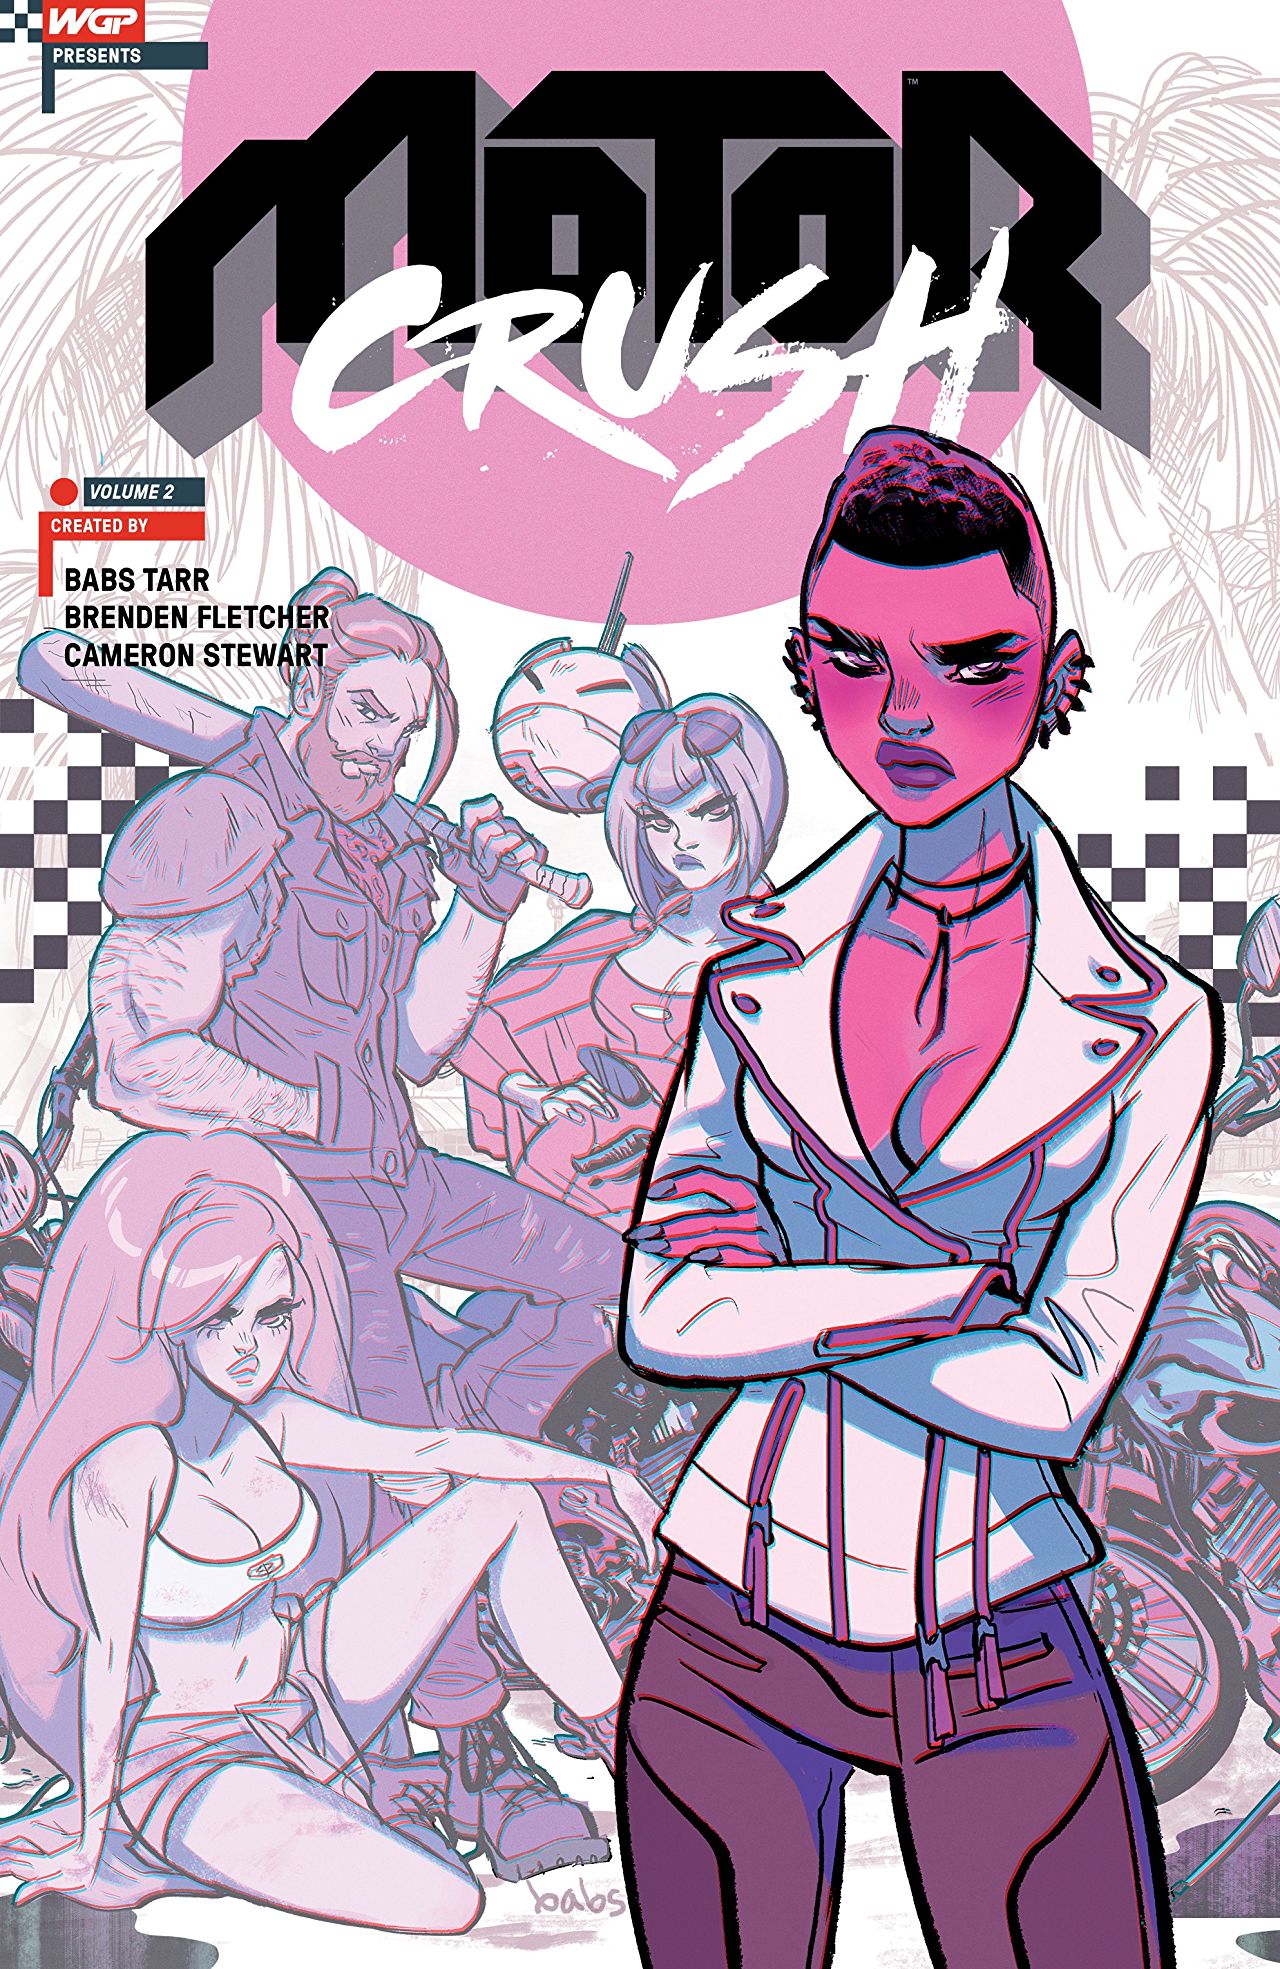 'Motor Crush Vol. 2' is energetic and frenetic -- sometimes to its detriment